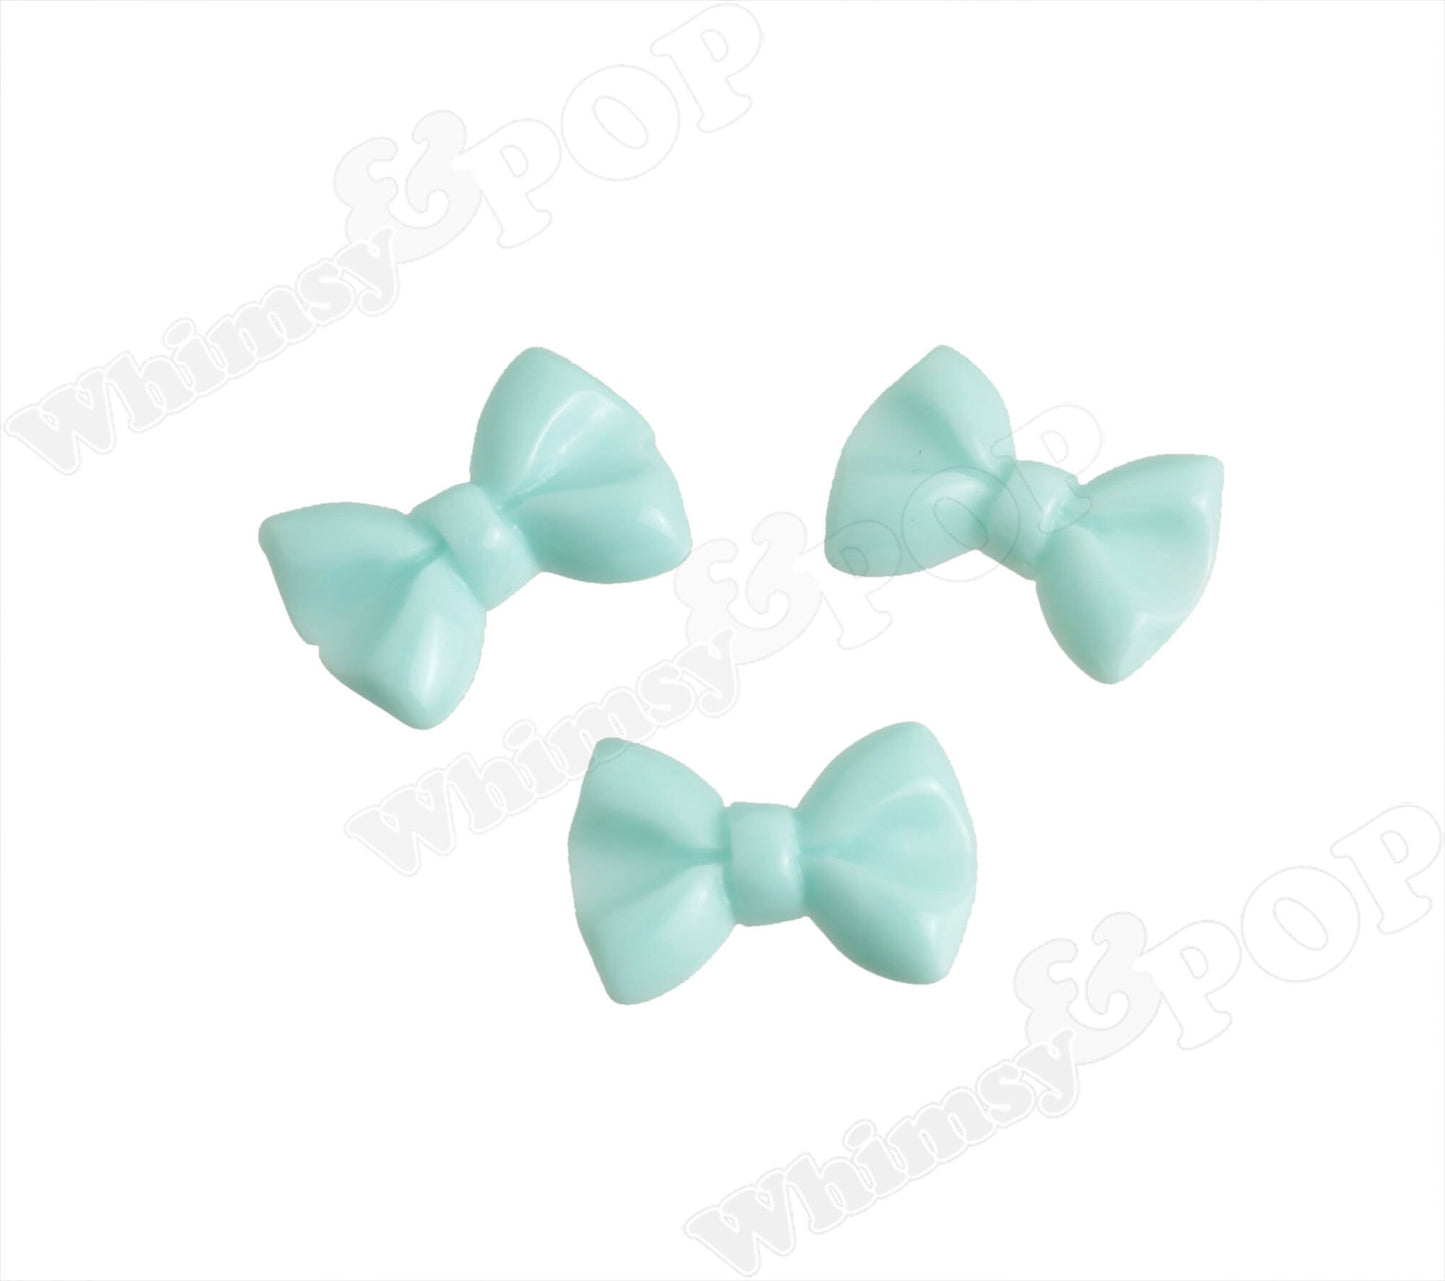 Colorful Resin Bow Cabochons, Resin Flatback Cabochons, 20mm